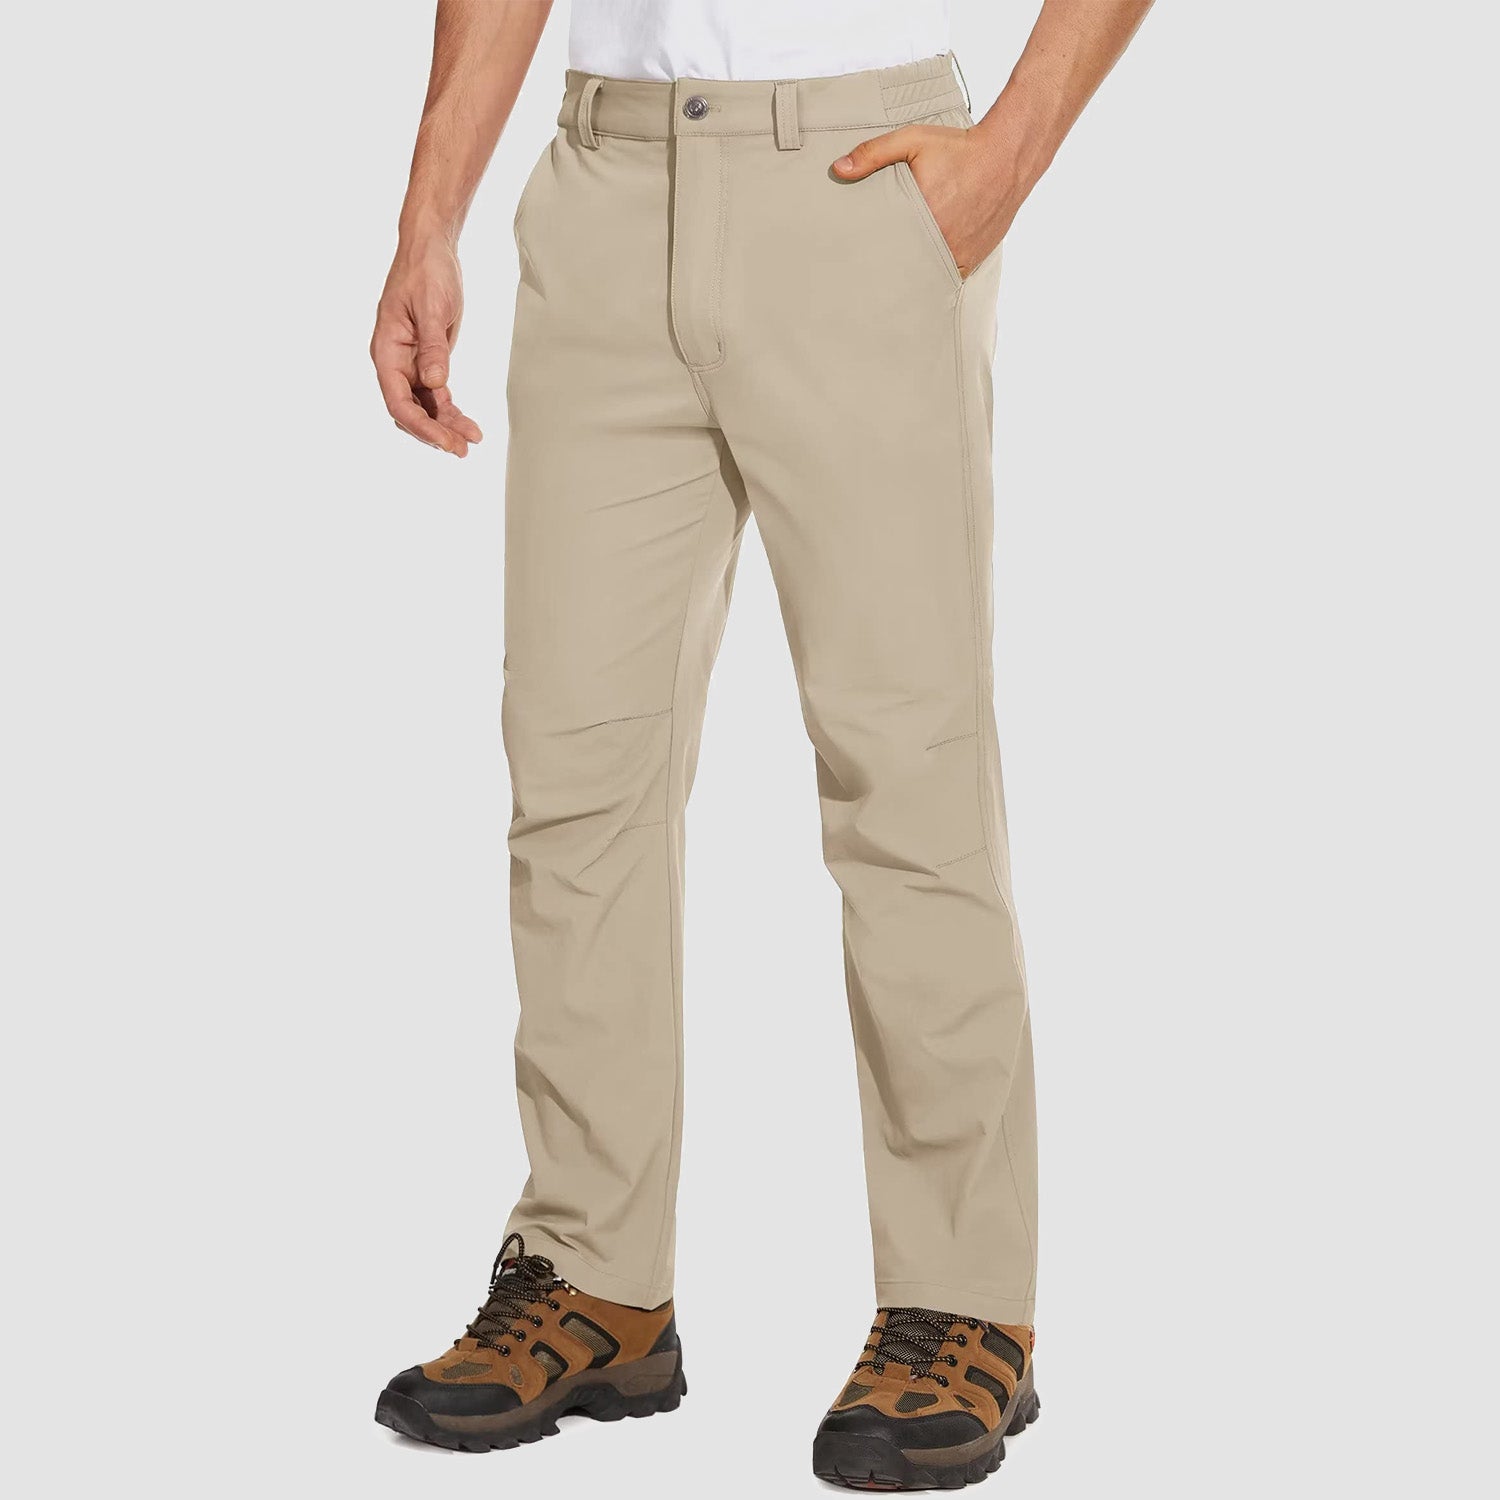 Men's Golf Pants Quick Dry Stretch Trousers